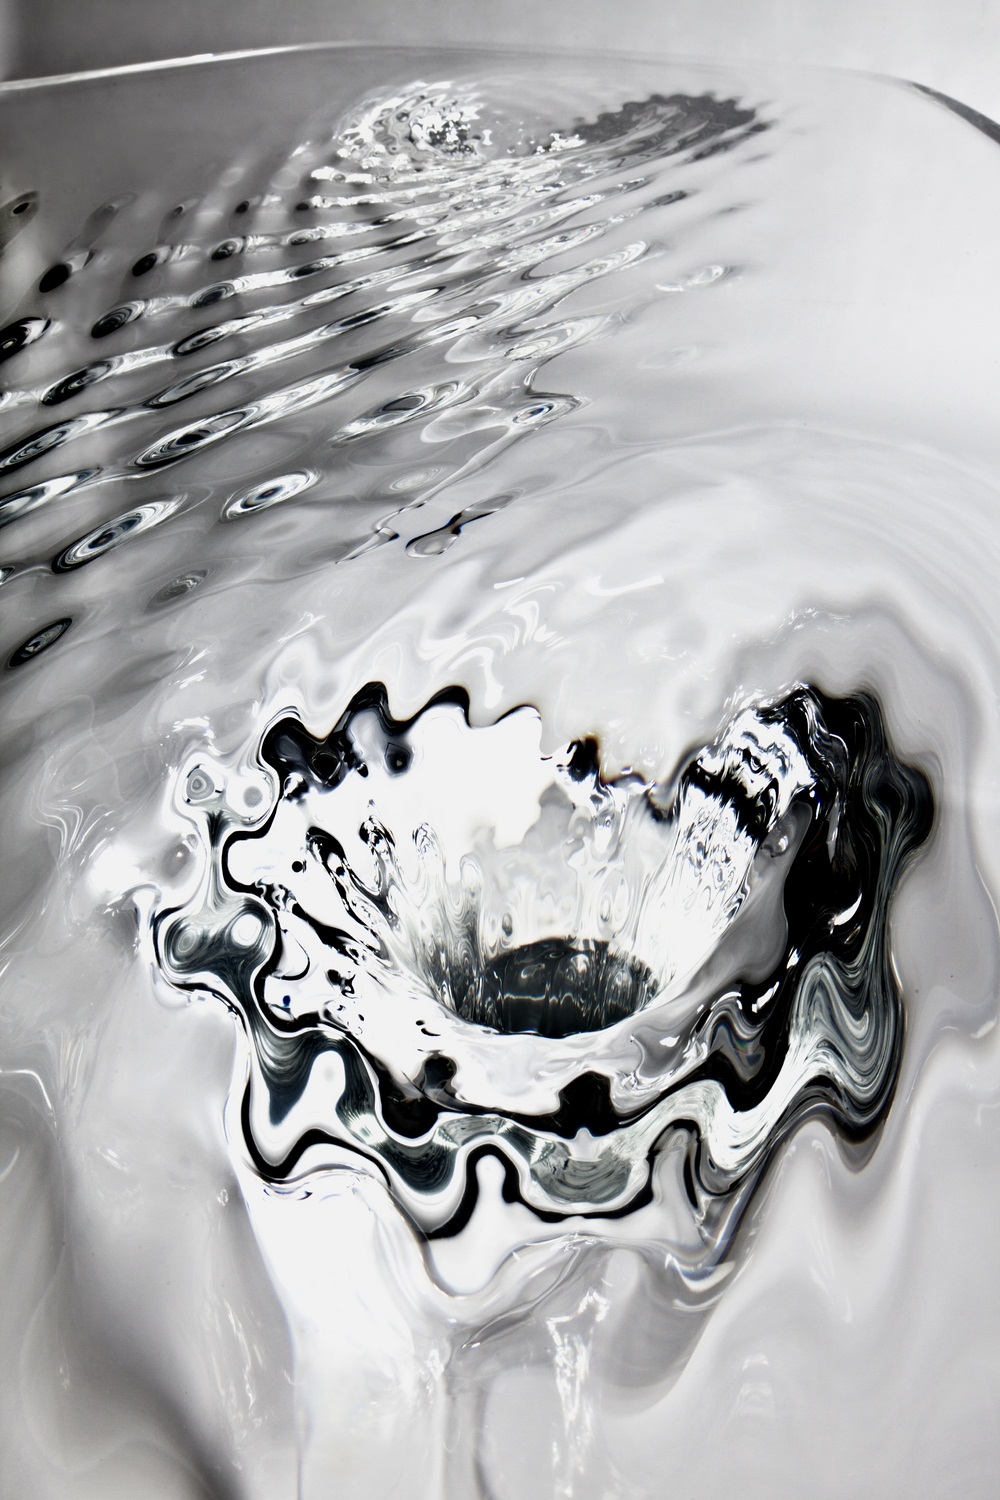 Archisearch - Photography by Jacopo Spilimbergo_Liquid Glacial Table